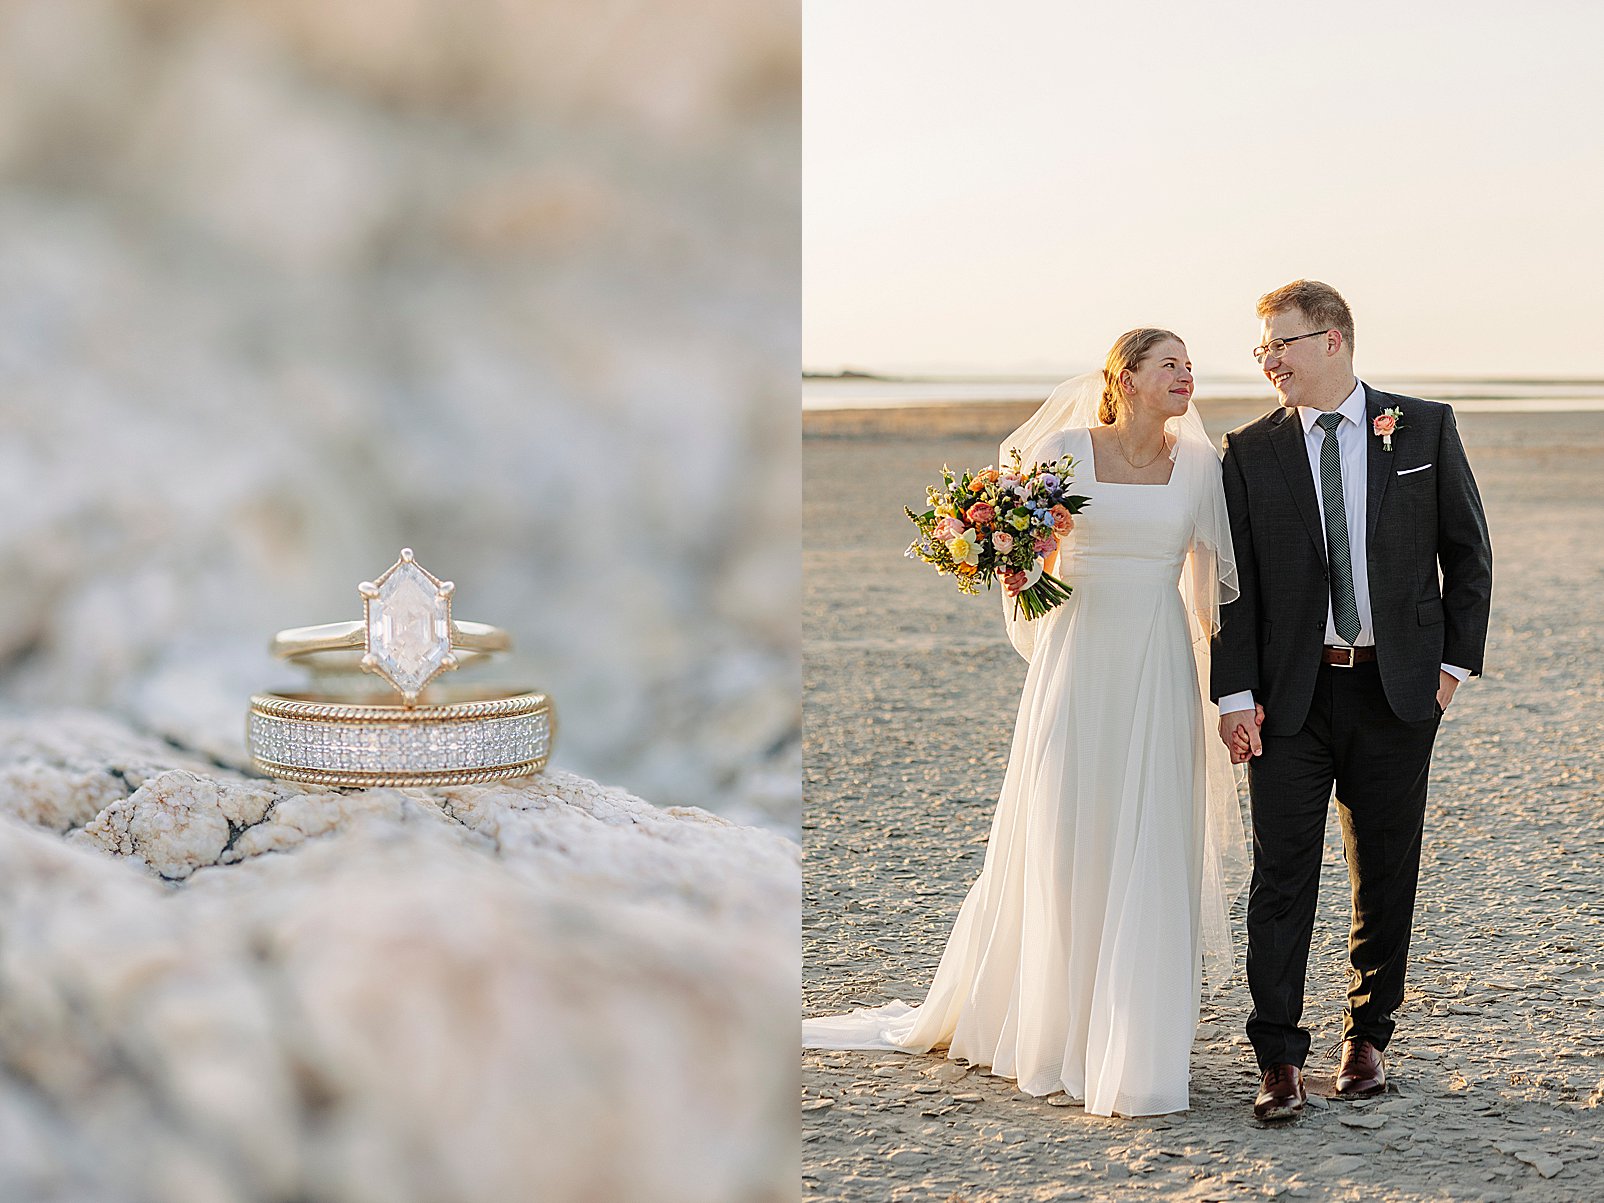 Antelope Island Wedding Pictures Colorful Bouquet Dusty Grey Green Suit